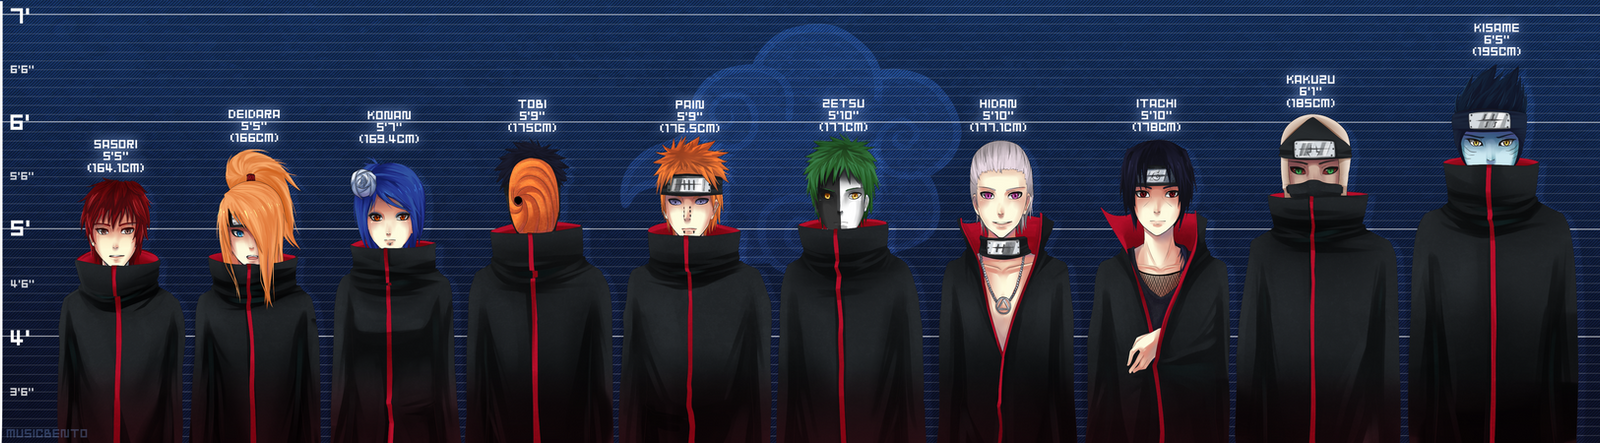 Who is the youngest Akatsuki?